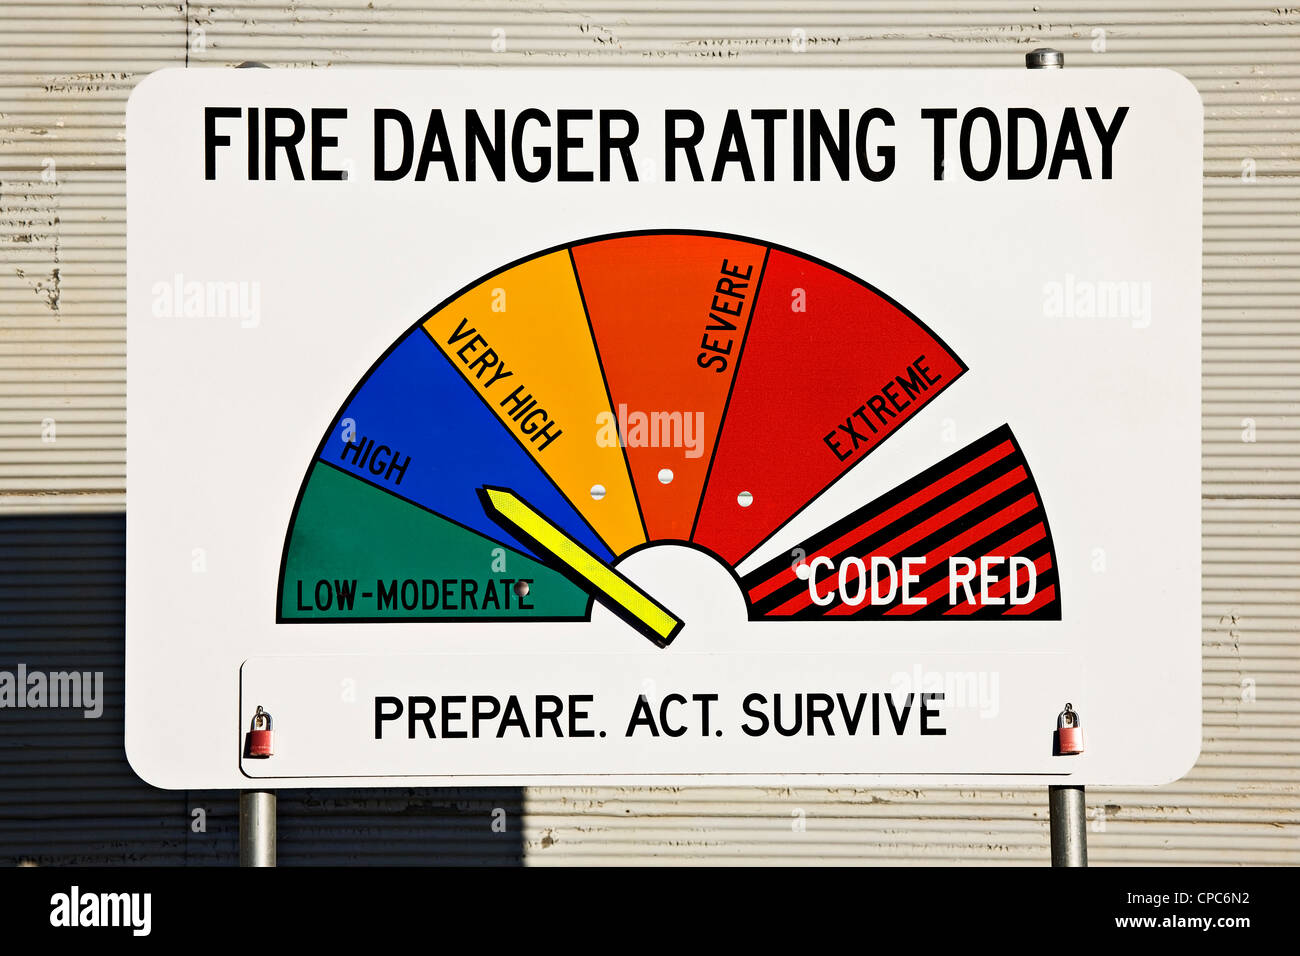 Clunes Australien / The Victorian Land Fire Authority Feuer Gefahr Rating-System. Stockfoto